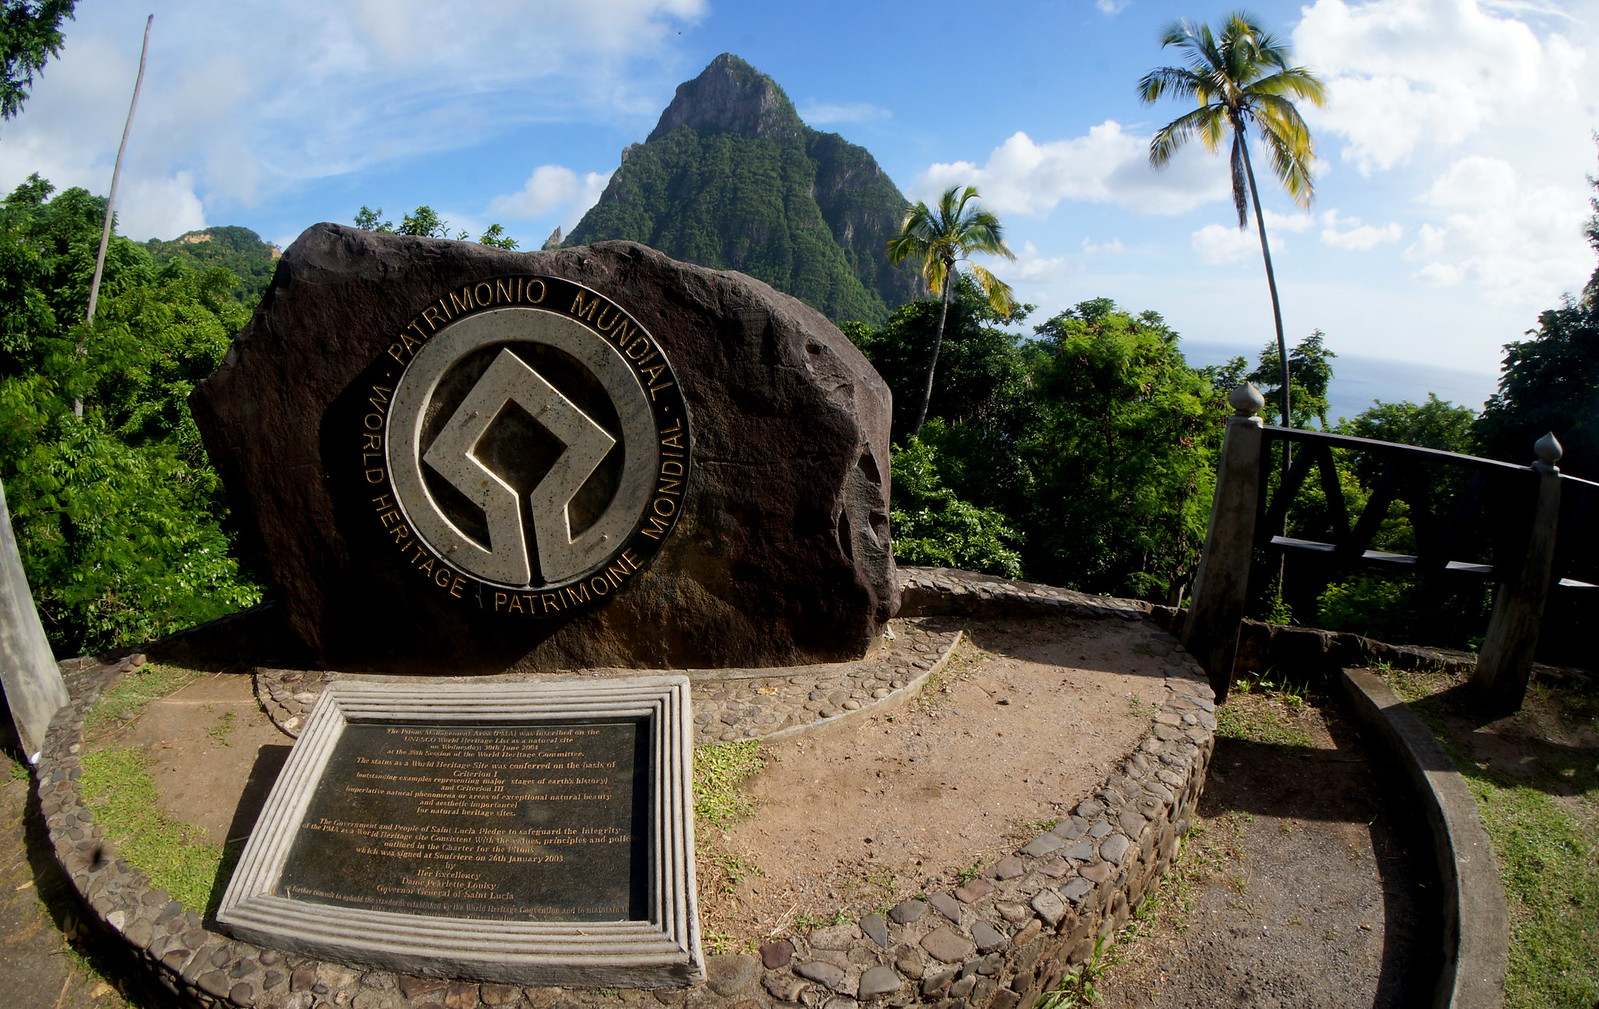 UNESCO World Heritage Site sign for the Pitons in Saint Lucia